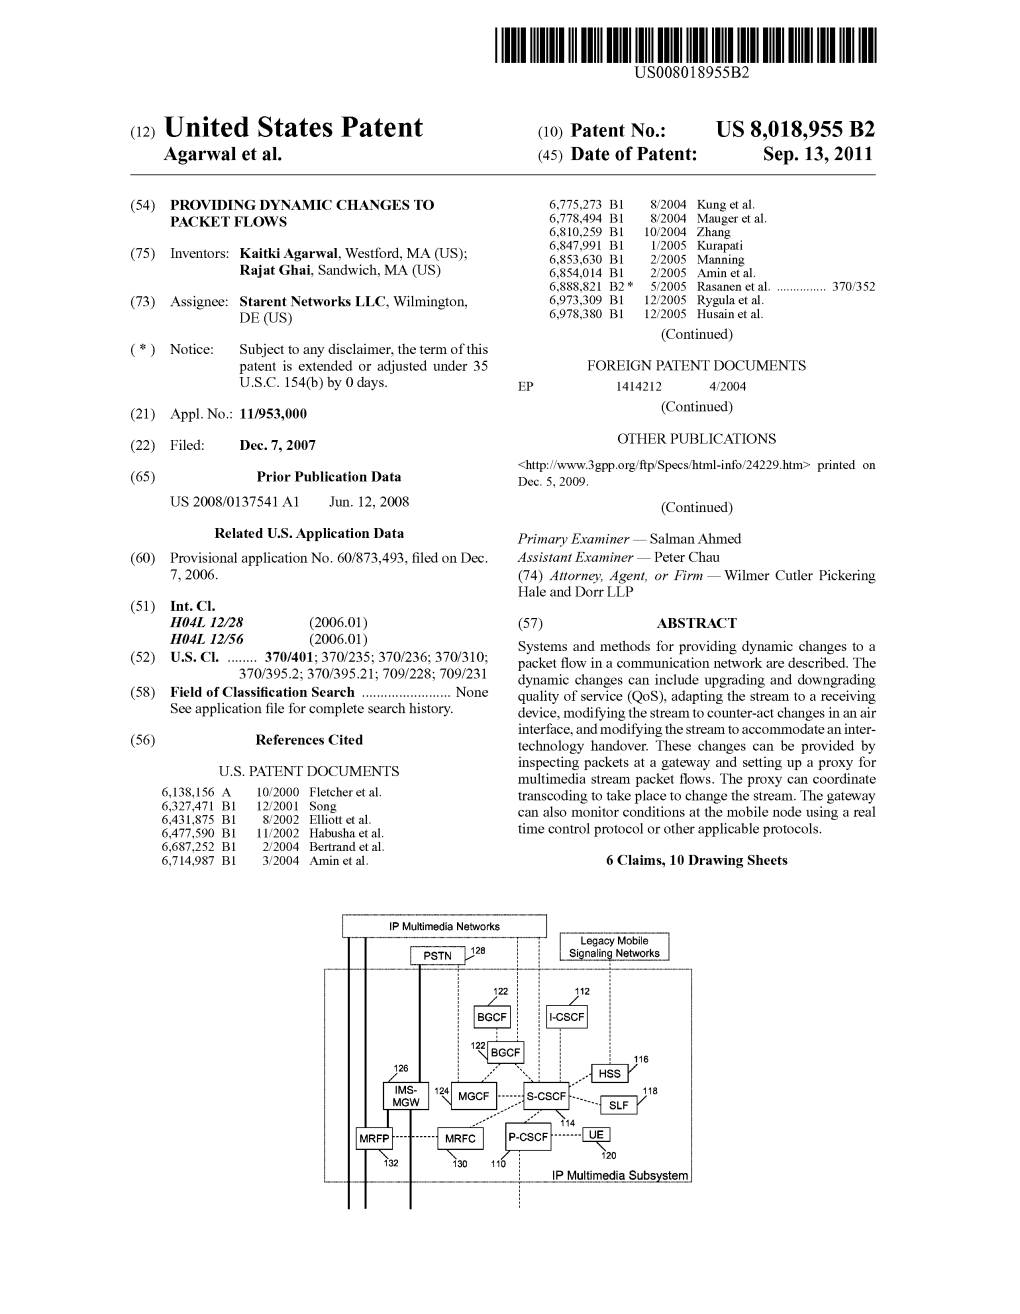 (12) United States Patent (10) Patent N0.: US 8,018,955 B2 Agarwal Et A]